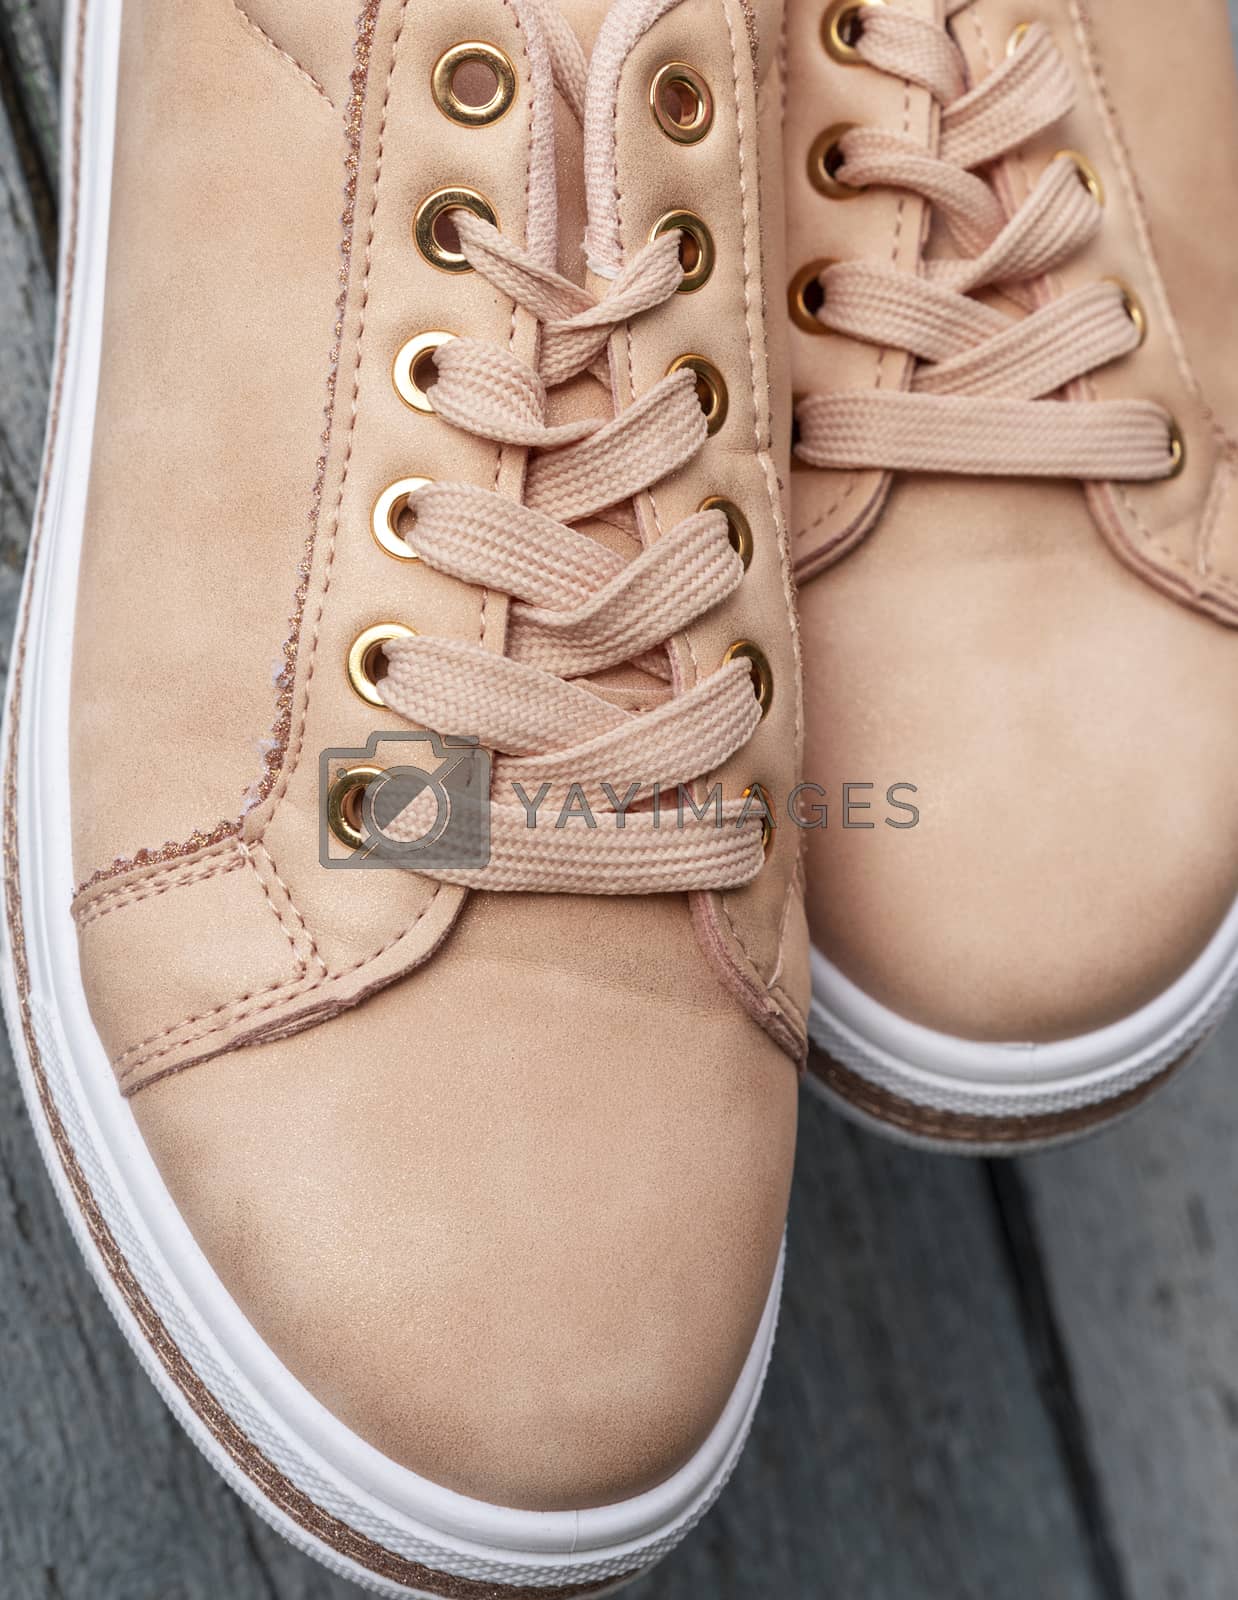 Royalty free image of fragment of beige leather women's shoes with laces by ndanko